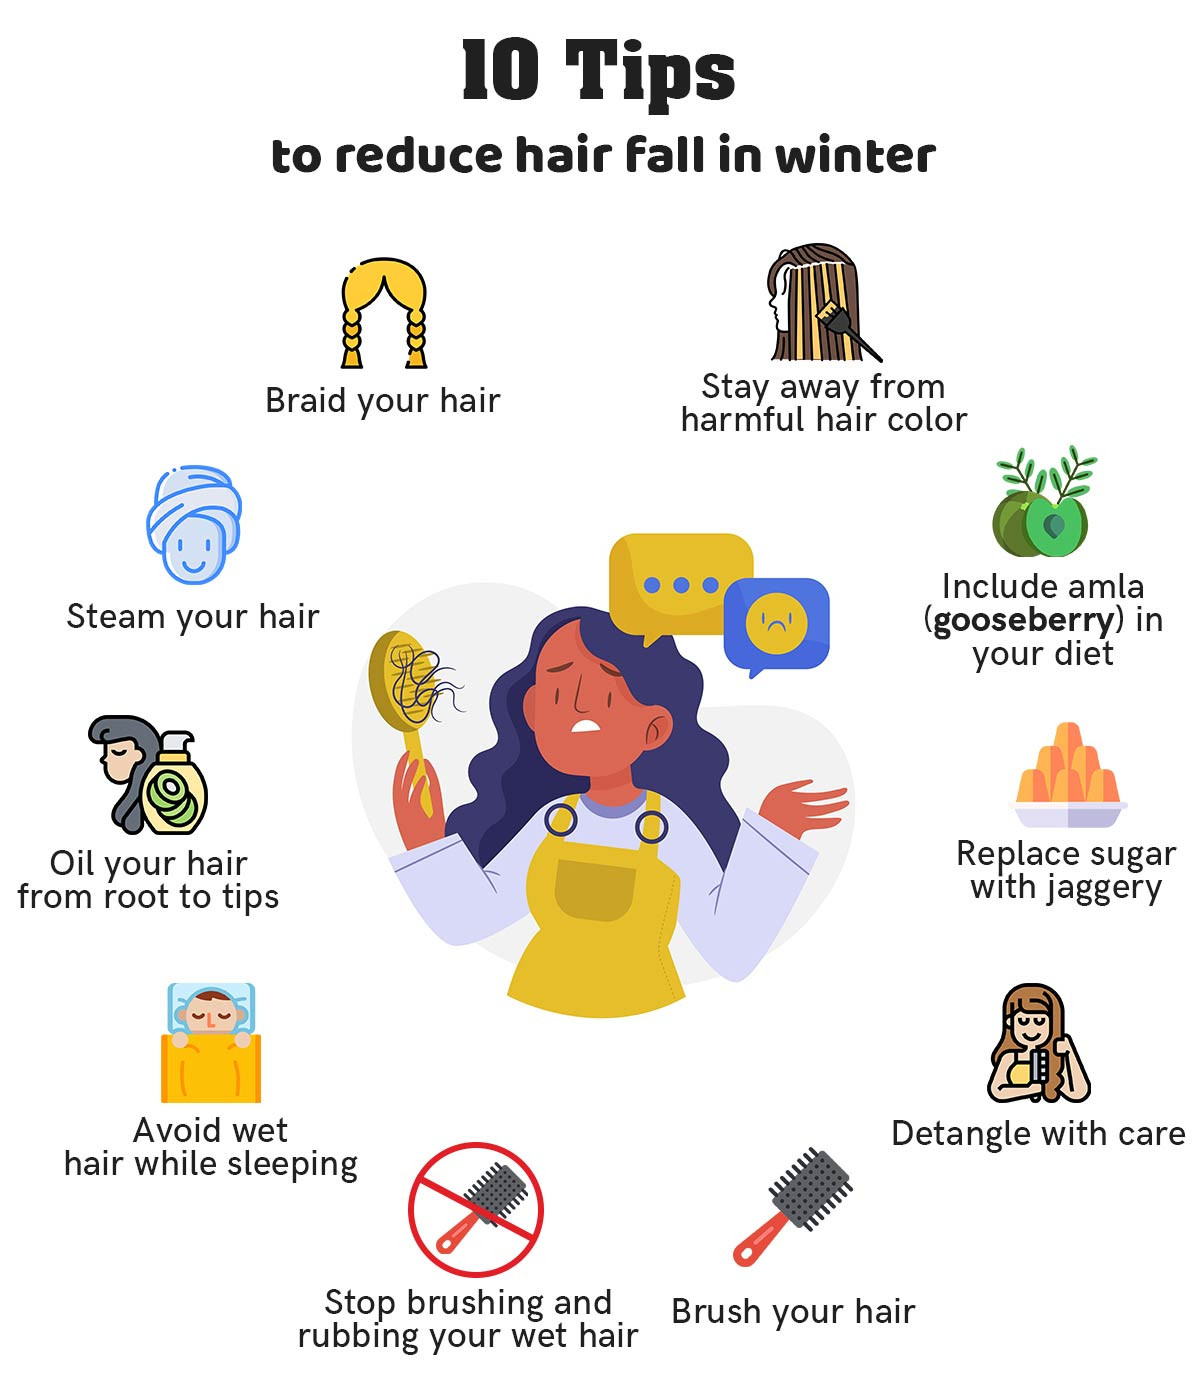 10 tips to reduce hair fall in winter | The Art of Living India